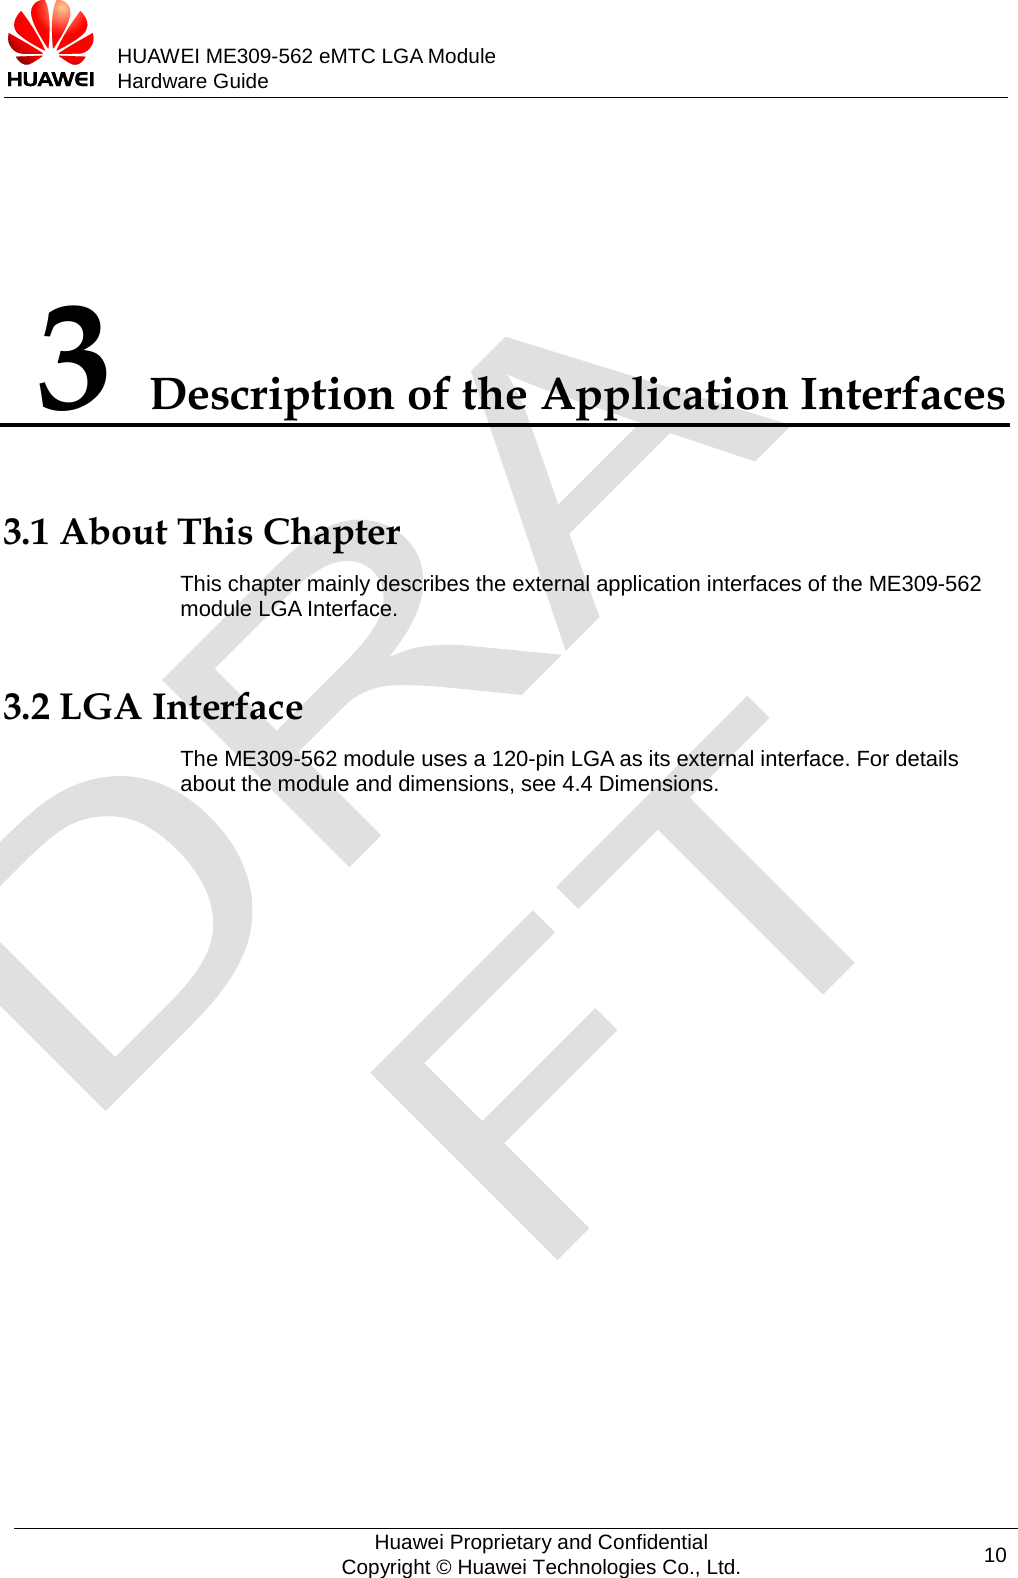           HUAWEI ME309-562 eMTC LGA Module Hardware Guide  3 Description of the Application Interfaces 3.1 About This Chapter This chapter mainly describes the external application interfaces of the ME309-562 module LGA Interface. 3.2 LGA Interface The ME309-562 module uses a 120-pin LGA as its external interface. For details about the module and dimensions, see 4.4 Dimensions.  Huawei Proprietary and Confidential Copyright © Huawei Technologies Co., Ltd. 10  